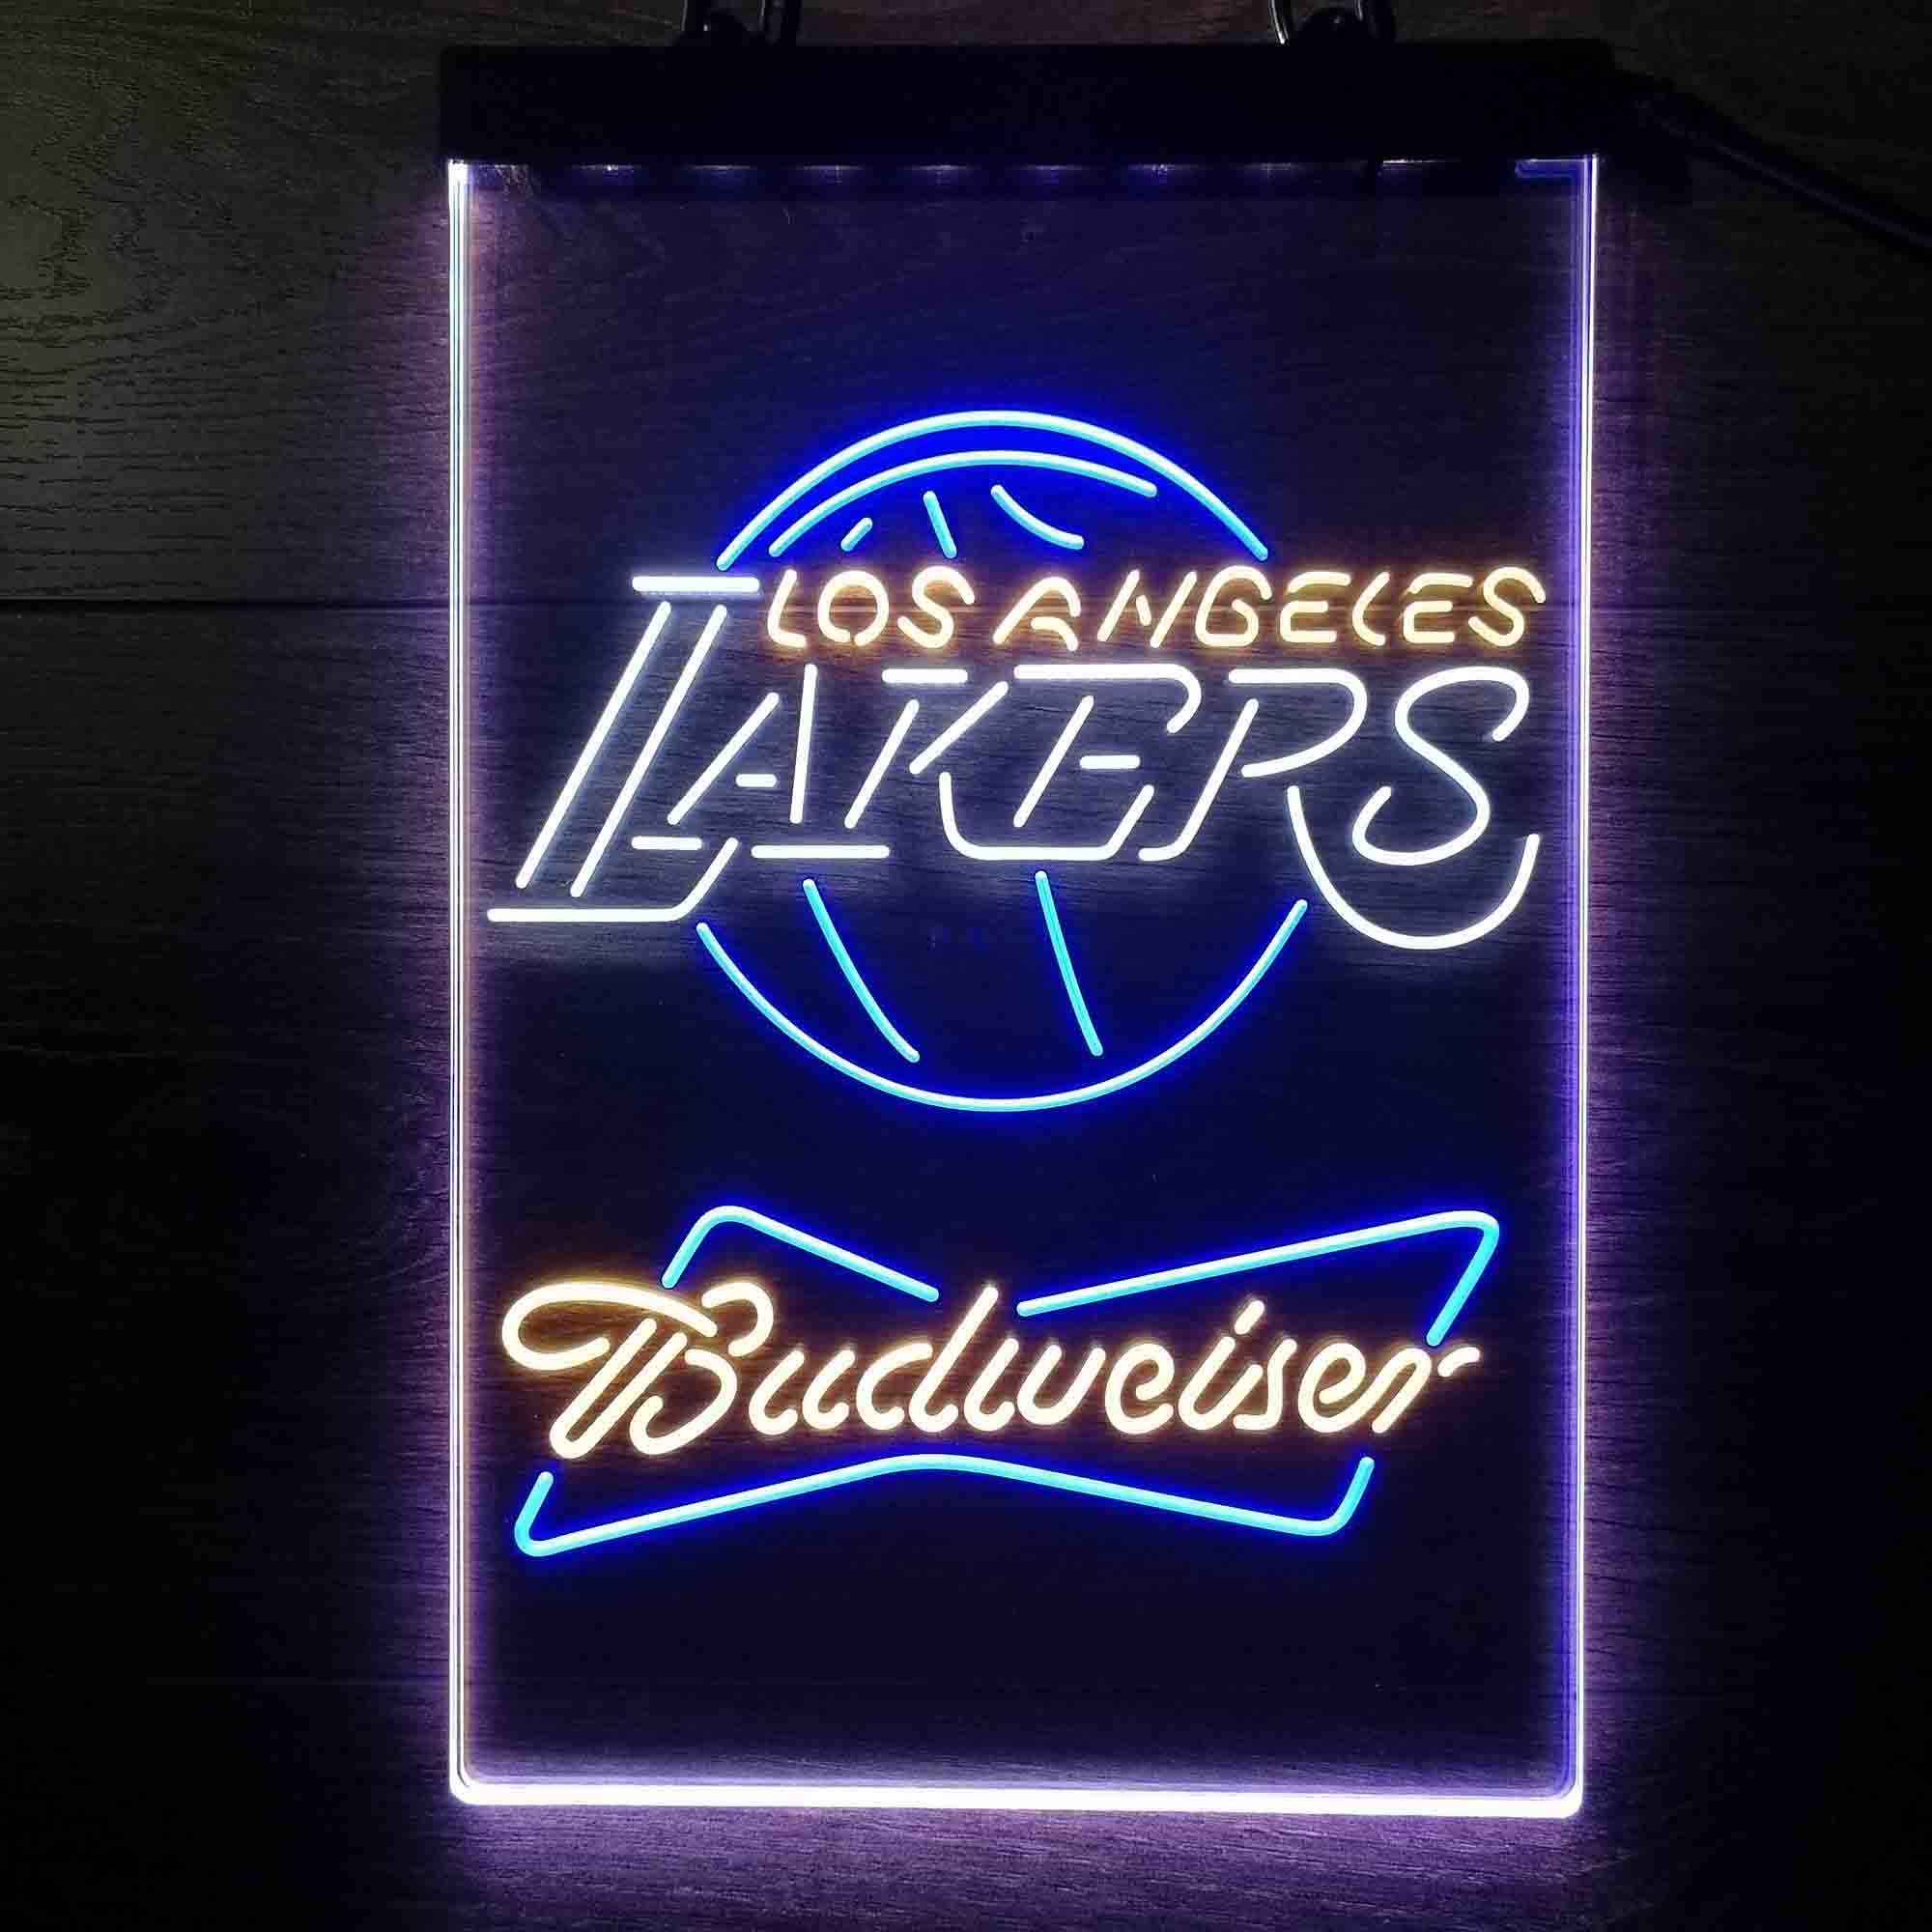 Los Angeles Lakers Nba Budweiser Neon LED Sign 3 Colors